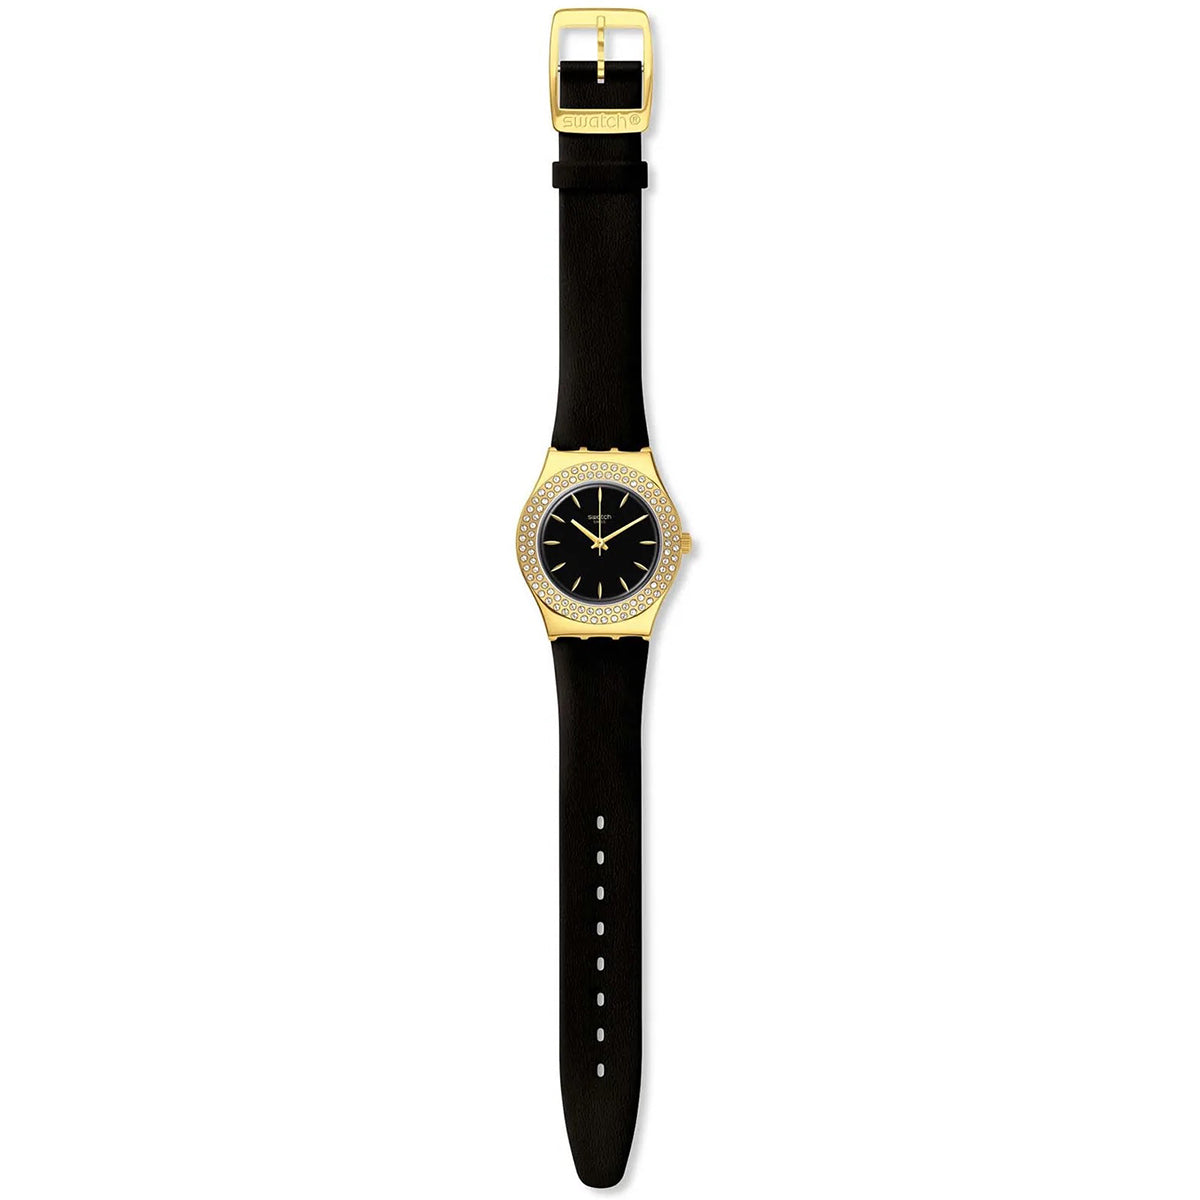 Swatch - Goldy Show - YLG141